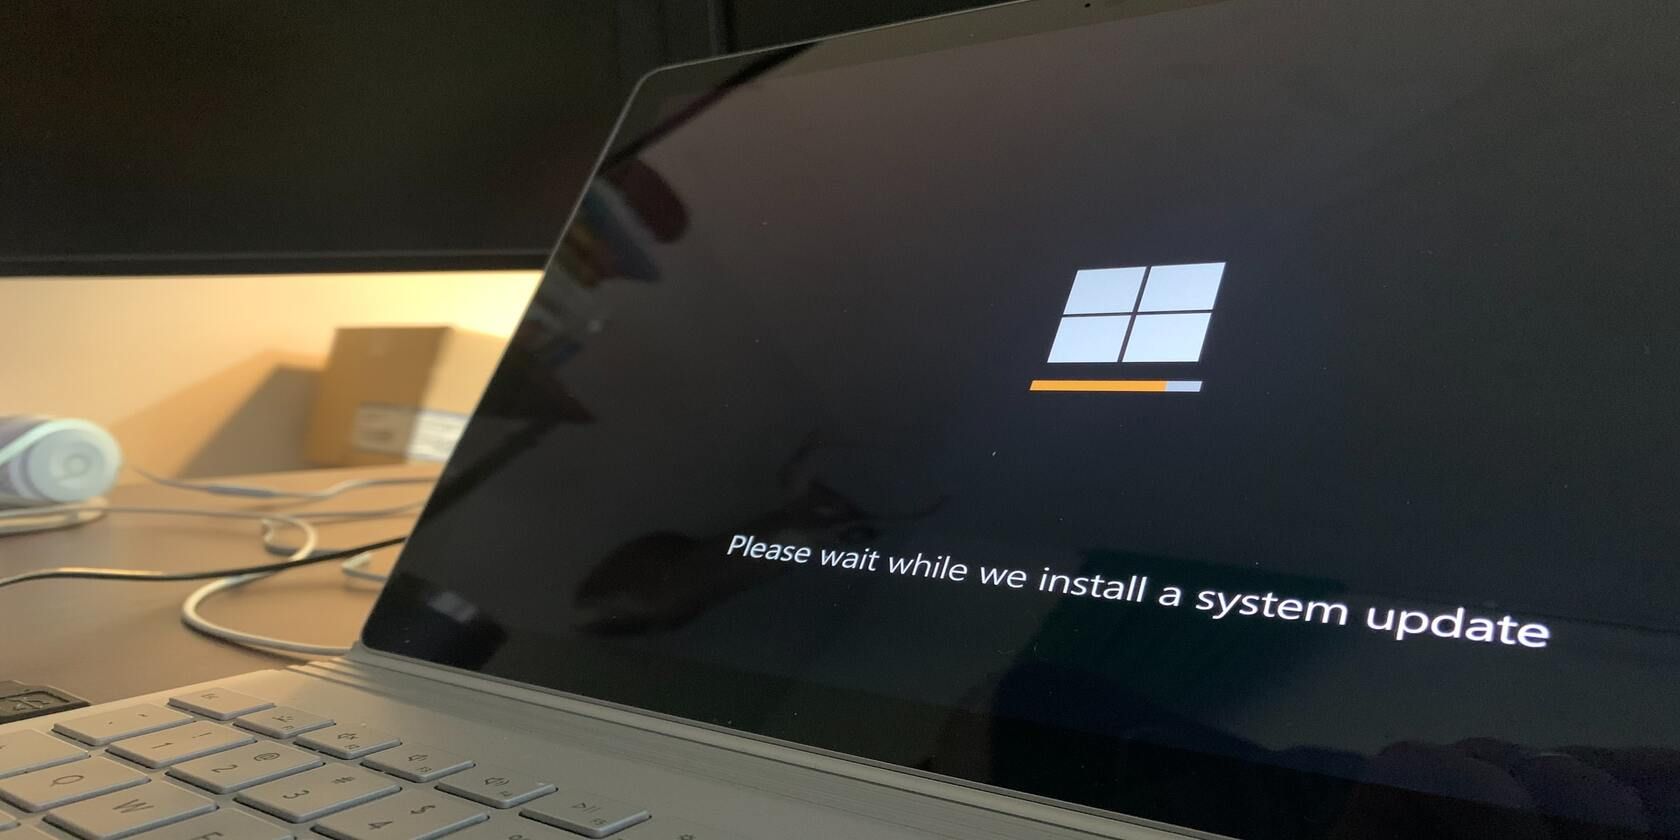 Windows laptop displaying a system update message